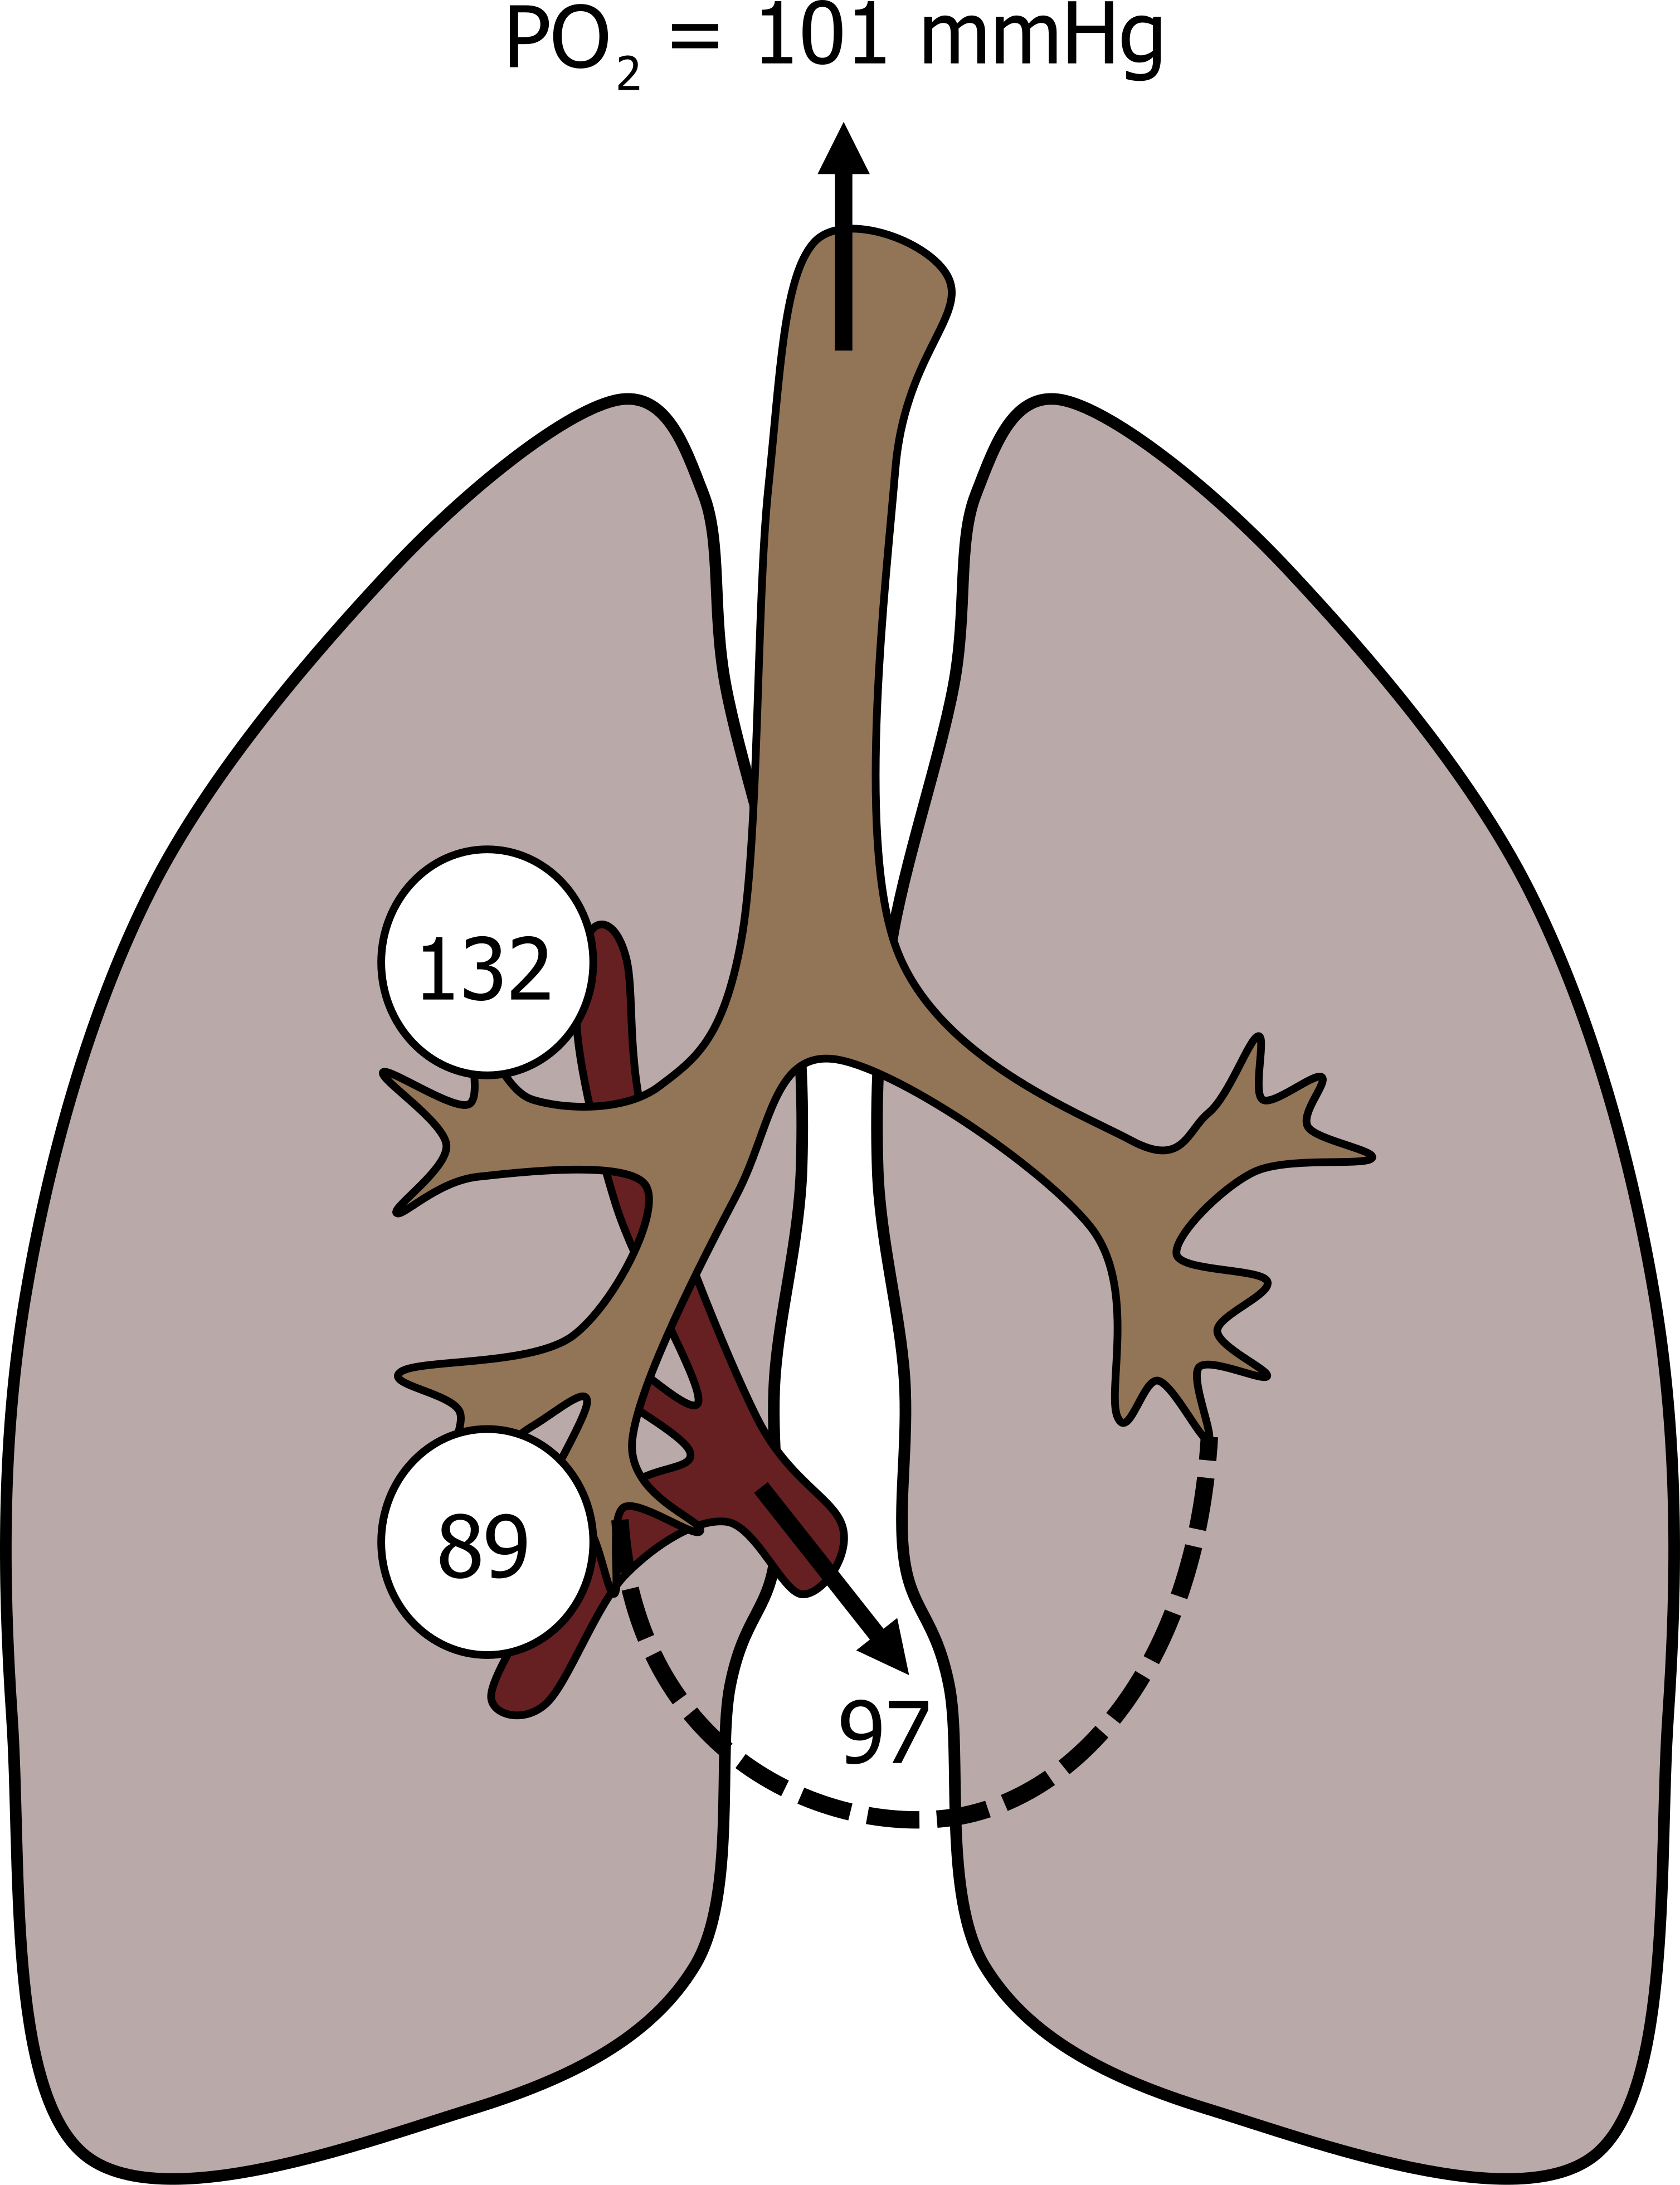 A cartoon of the lungs depicts an alveolus at the apex of one lung and an alveolus at the base. Both alveoli are connects to the trachea by airways. Branches of a blood vessel descend from each alveolus, the one from the apical alveolus is narrow, the one from the basilar alveolus is wider. The blood vessels converge as they exit the lung. At the entrance of the trachea is labelled with PO2 = 101 mmHg and an arrow in the trachea points upward. The apical alveolus as 132 written inside. The basilar alveolus has 89 written inside. The converged blood vessel has 97 written inside.